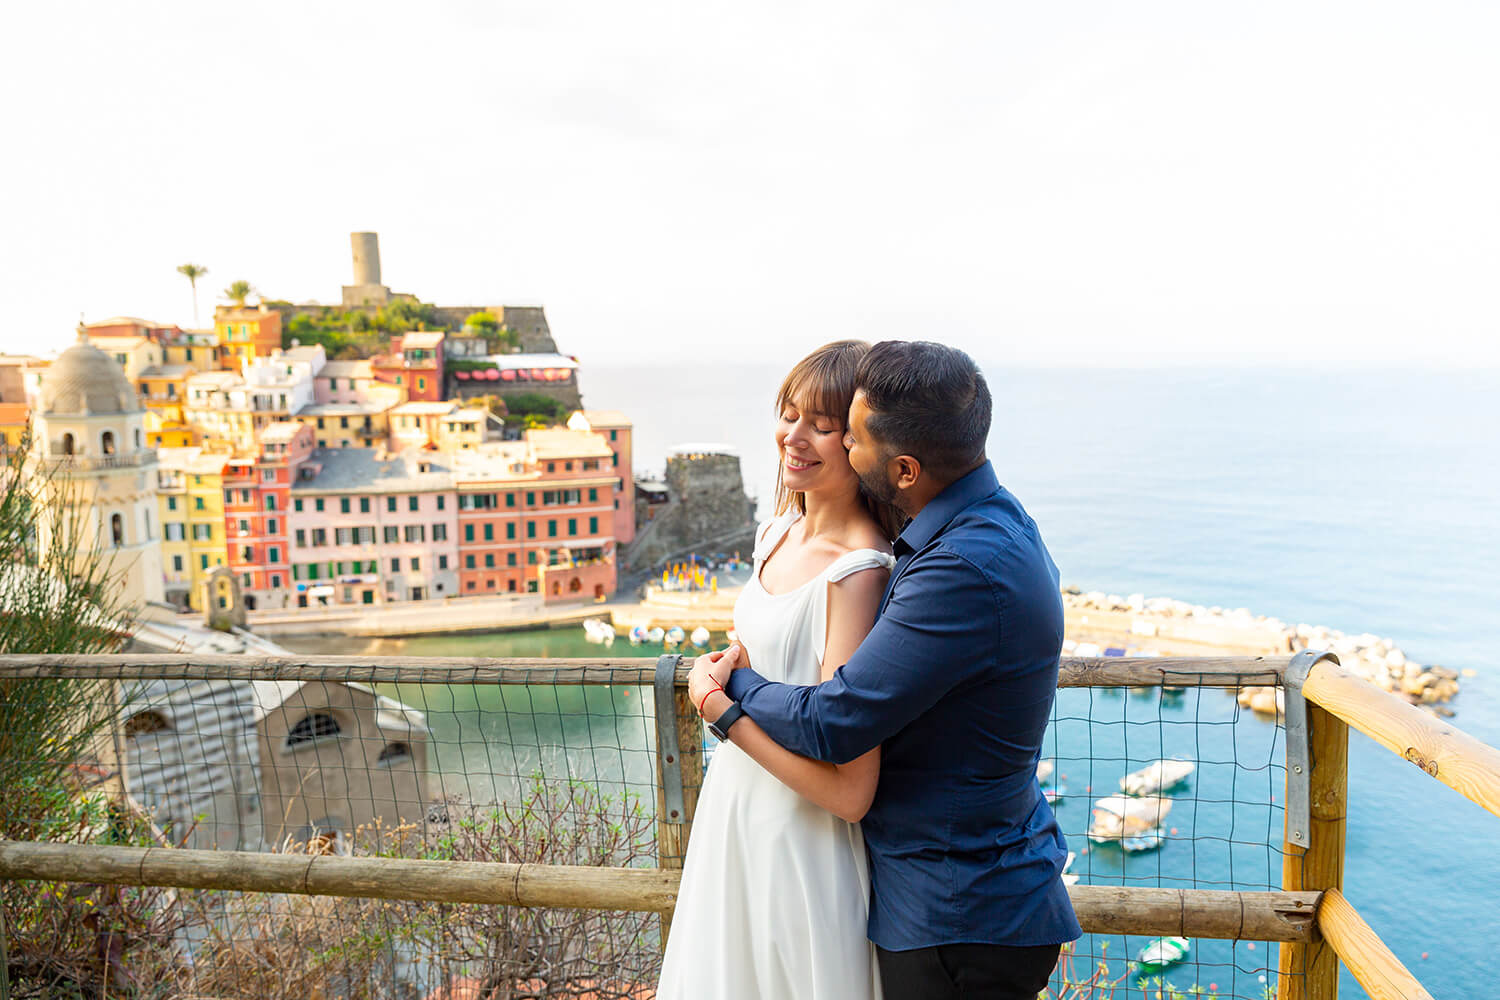 Couple hugging on a viewpoint in Vernazza, Cinque Terre, after a marriage proposal